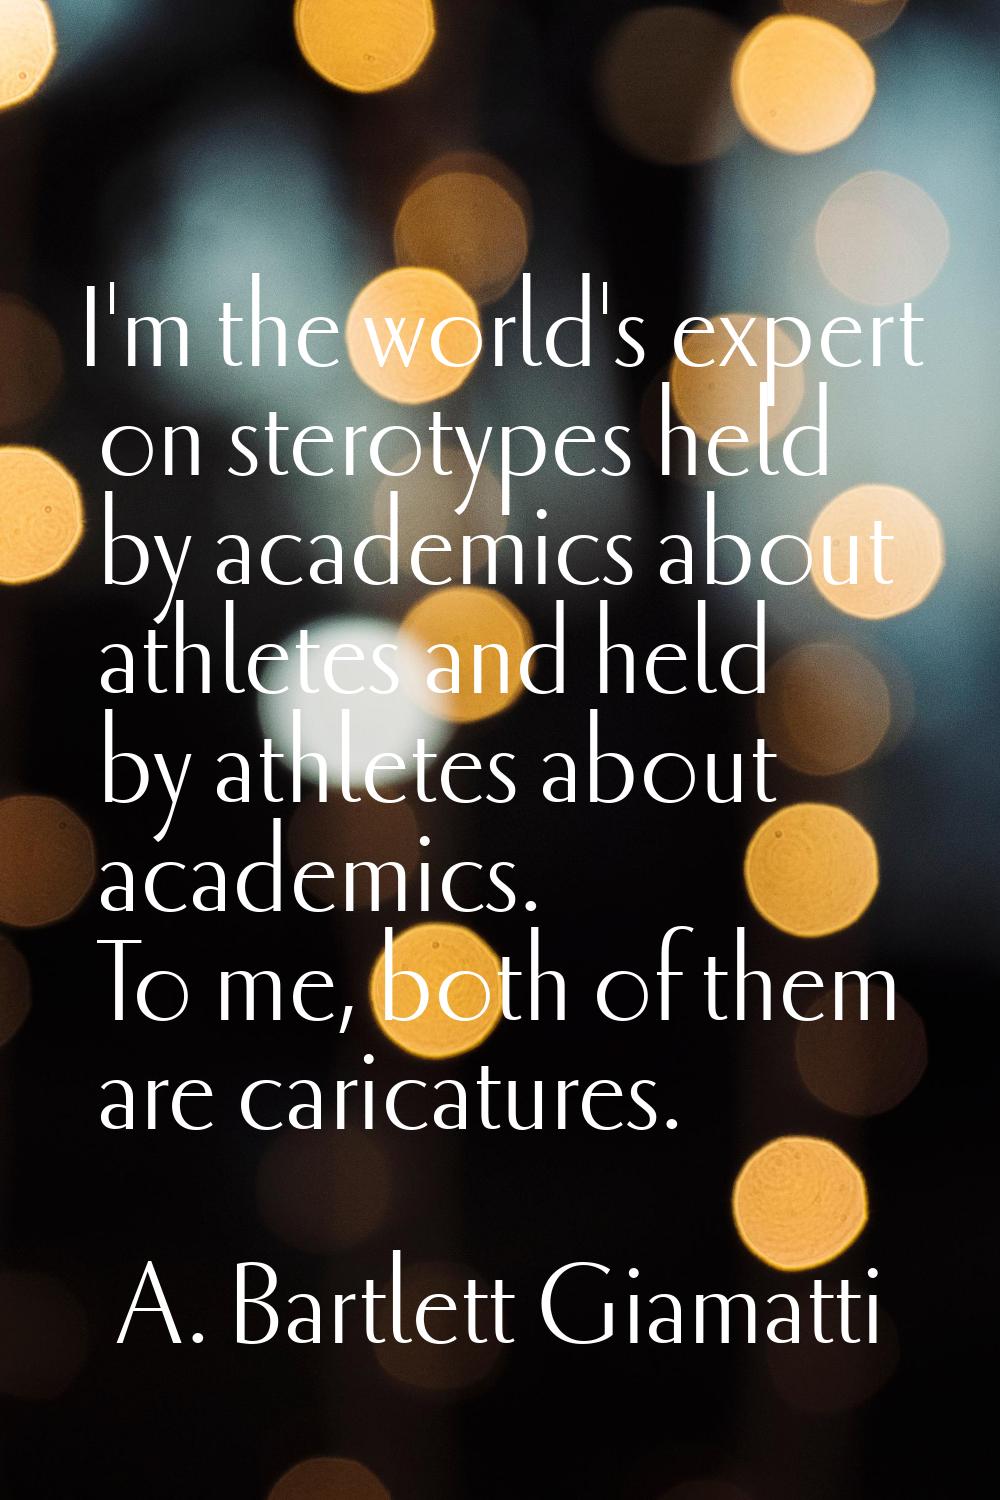 I'm the world's expert on sterotypes held by academics about athletes and held by athletes about ac